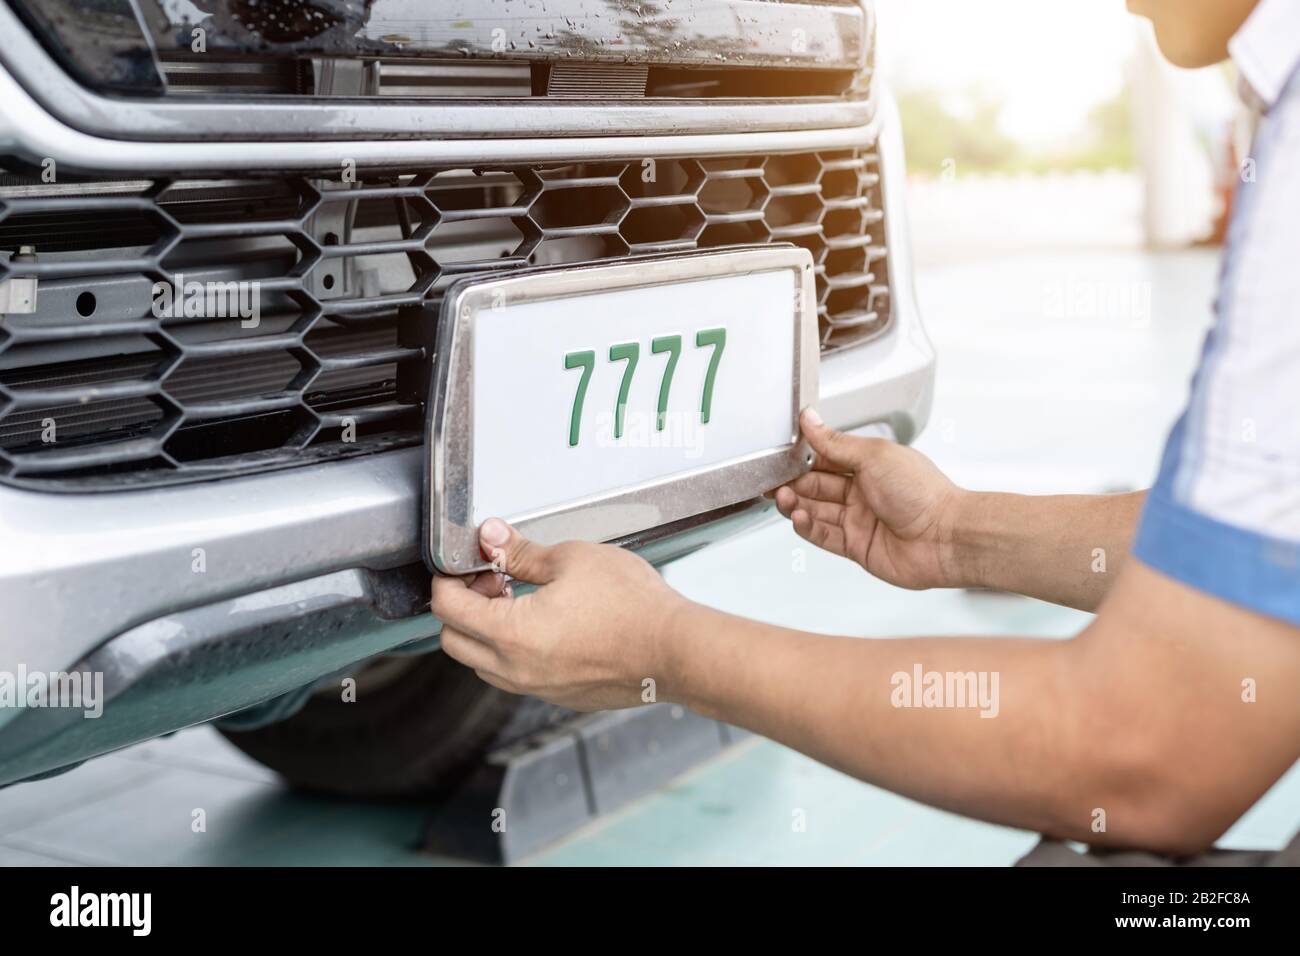 Technician changing Thailand car plate number in service center Stock Photo